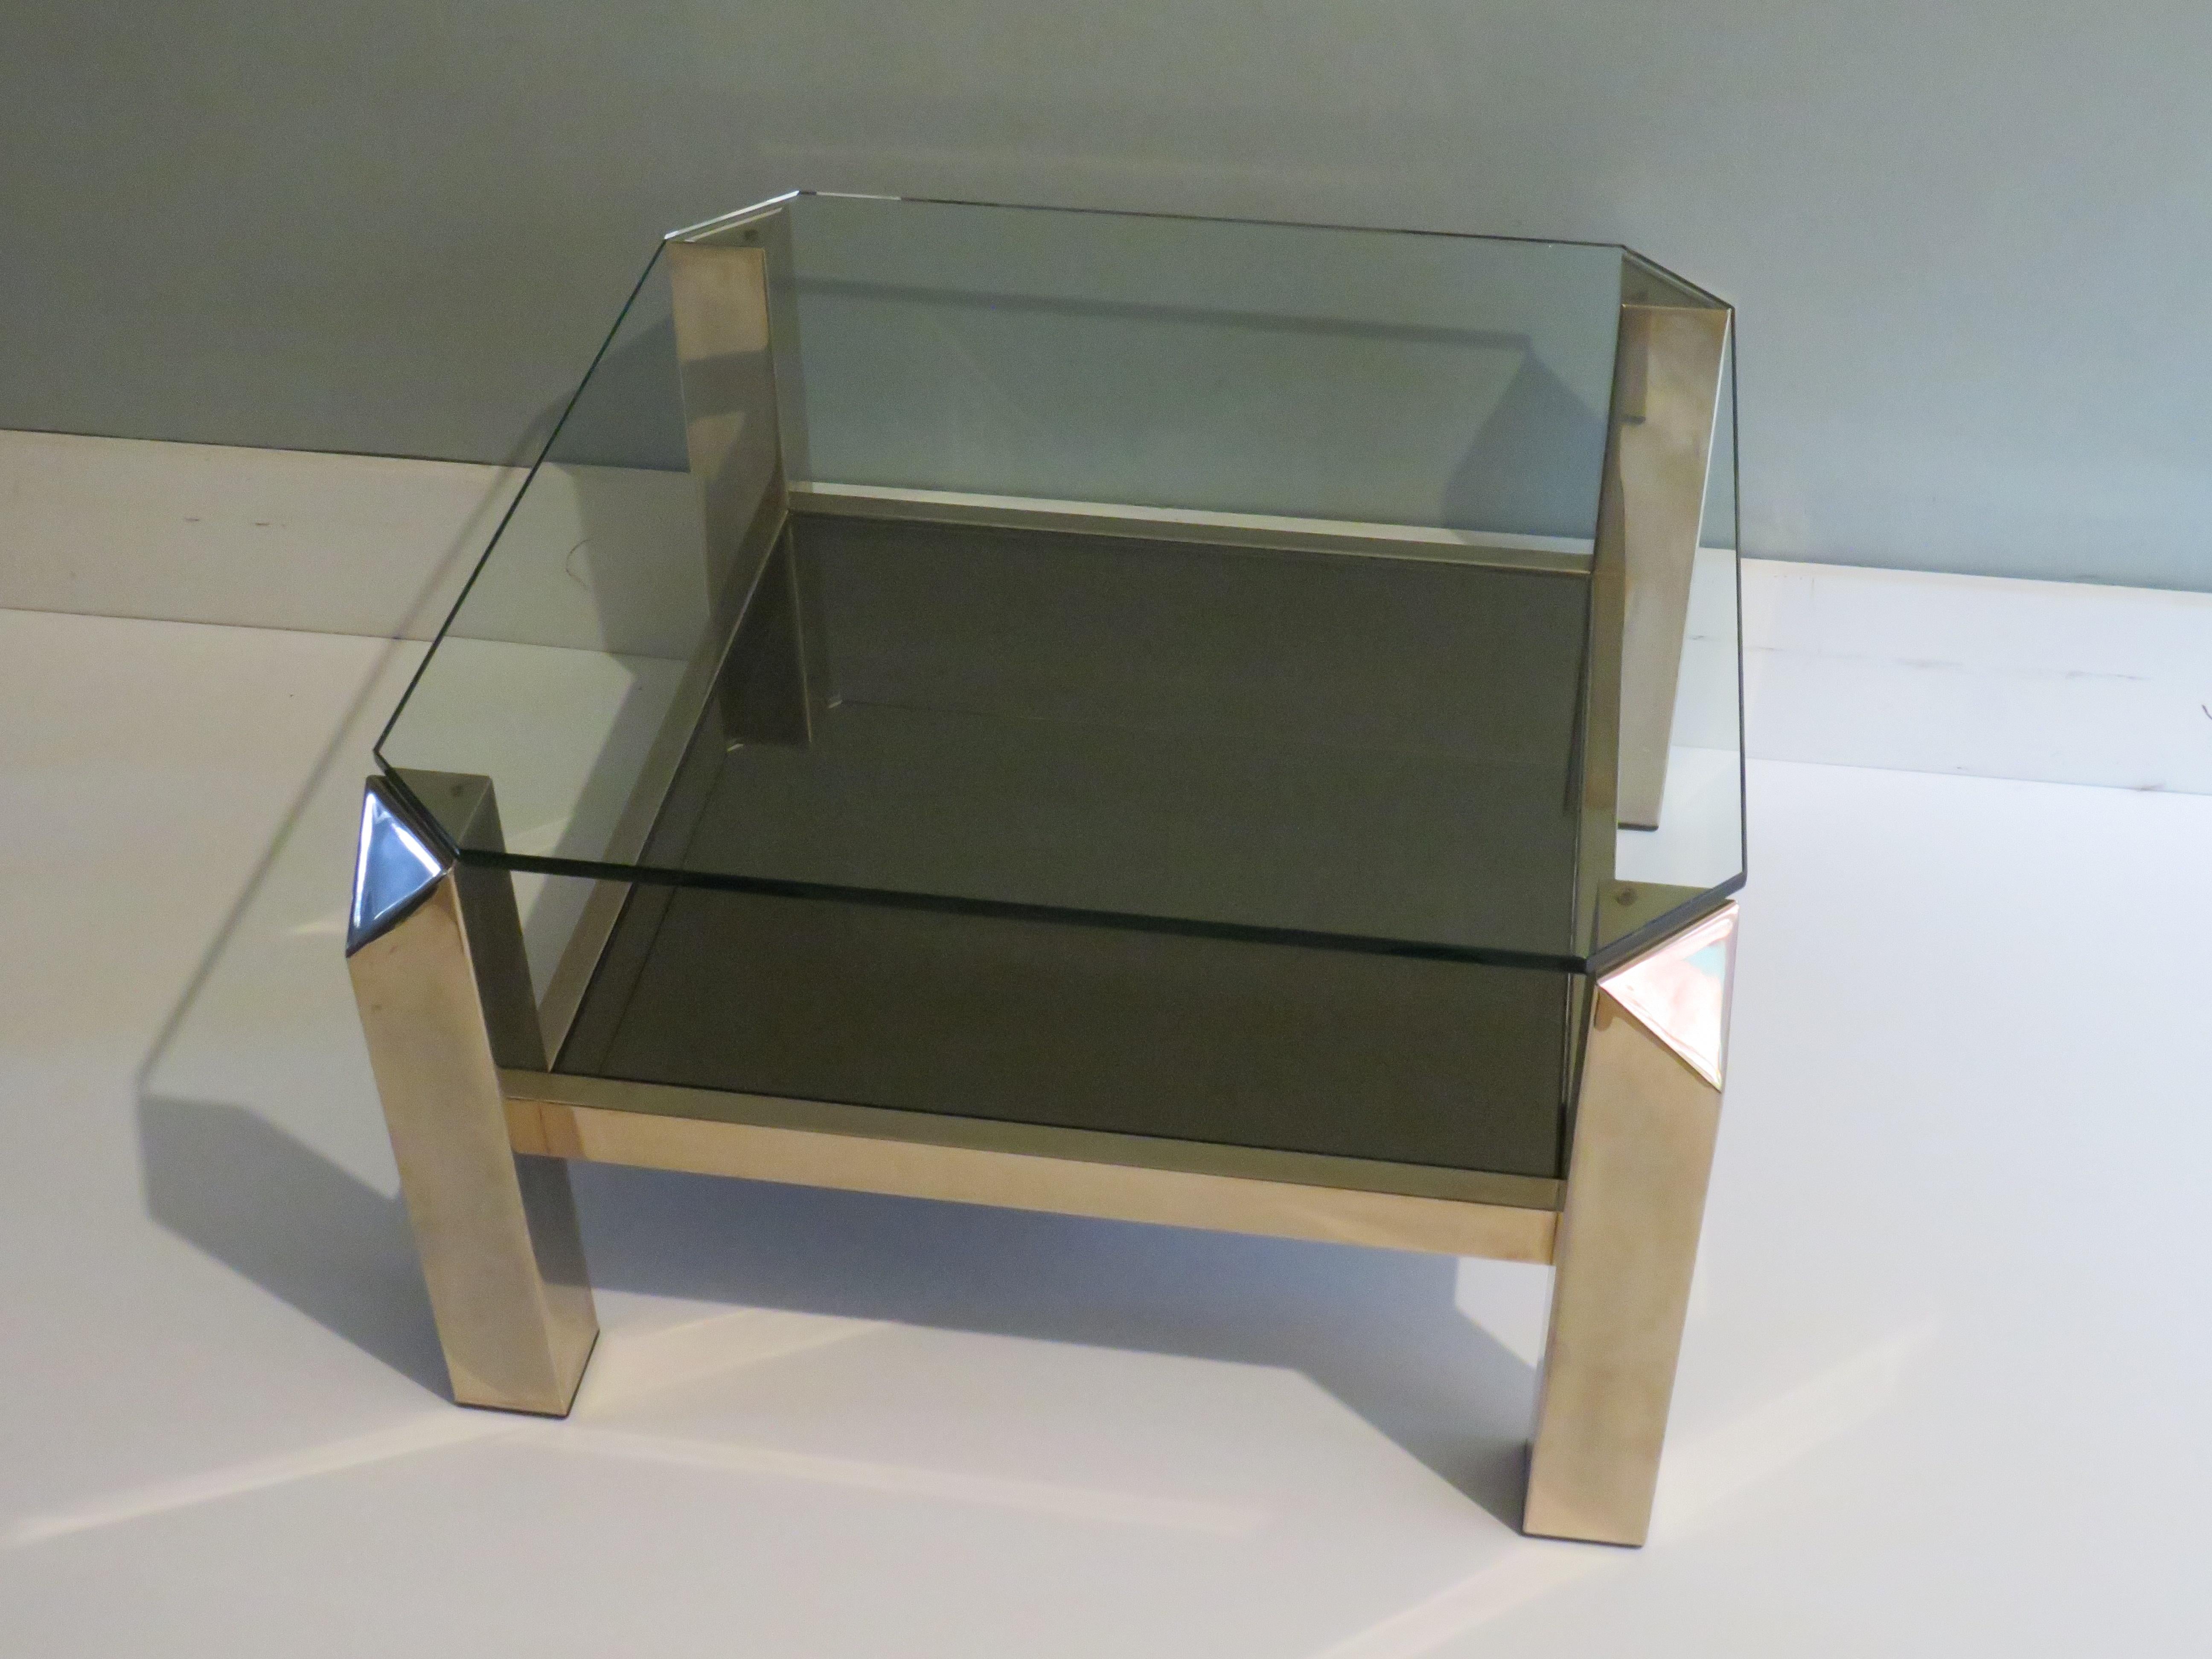 Square coffee table in 23 carat gold-plated metal base and 2 glass tops.
The lower top is made of smoked mirror glass and the upper top is made of transparent glass.
The frame has remarkable chamfered corners.
The height of the table is 37 cm, de